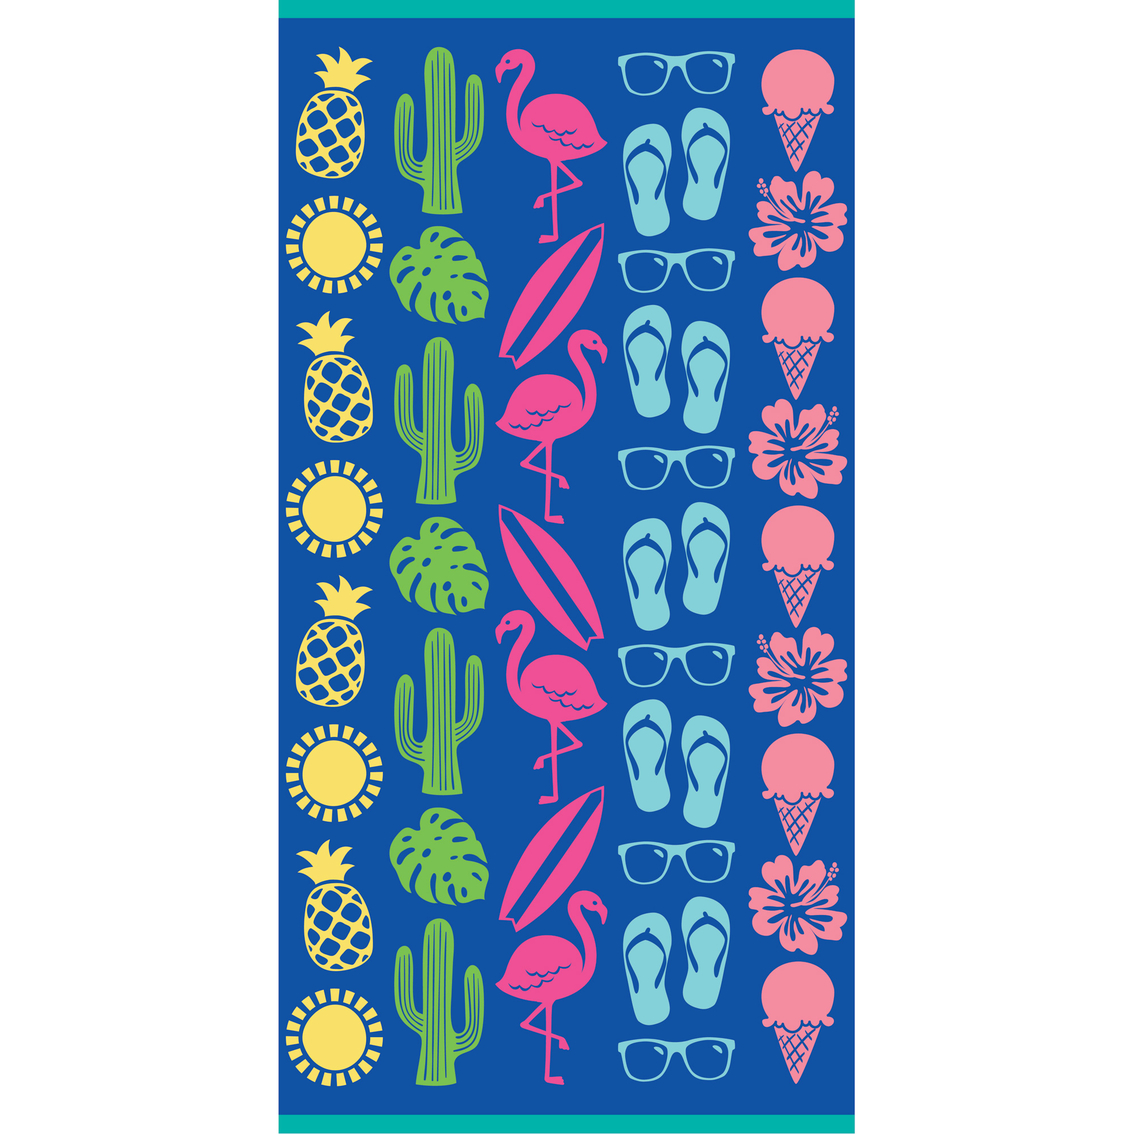 Official Licenced 140cm X 70cm Cotton Beach Towel Summer Time Indoor Outdoor Fun 